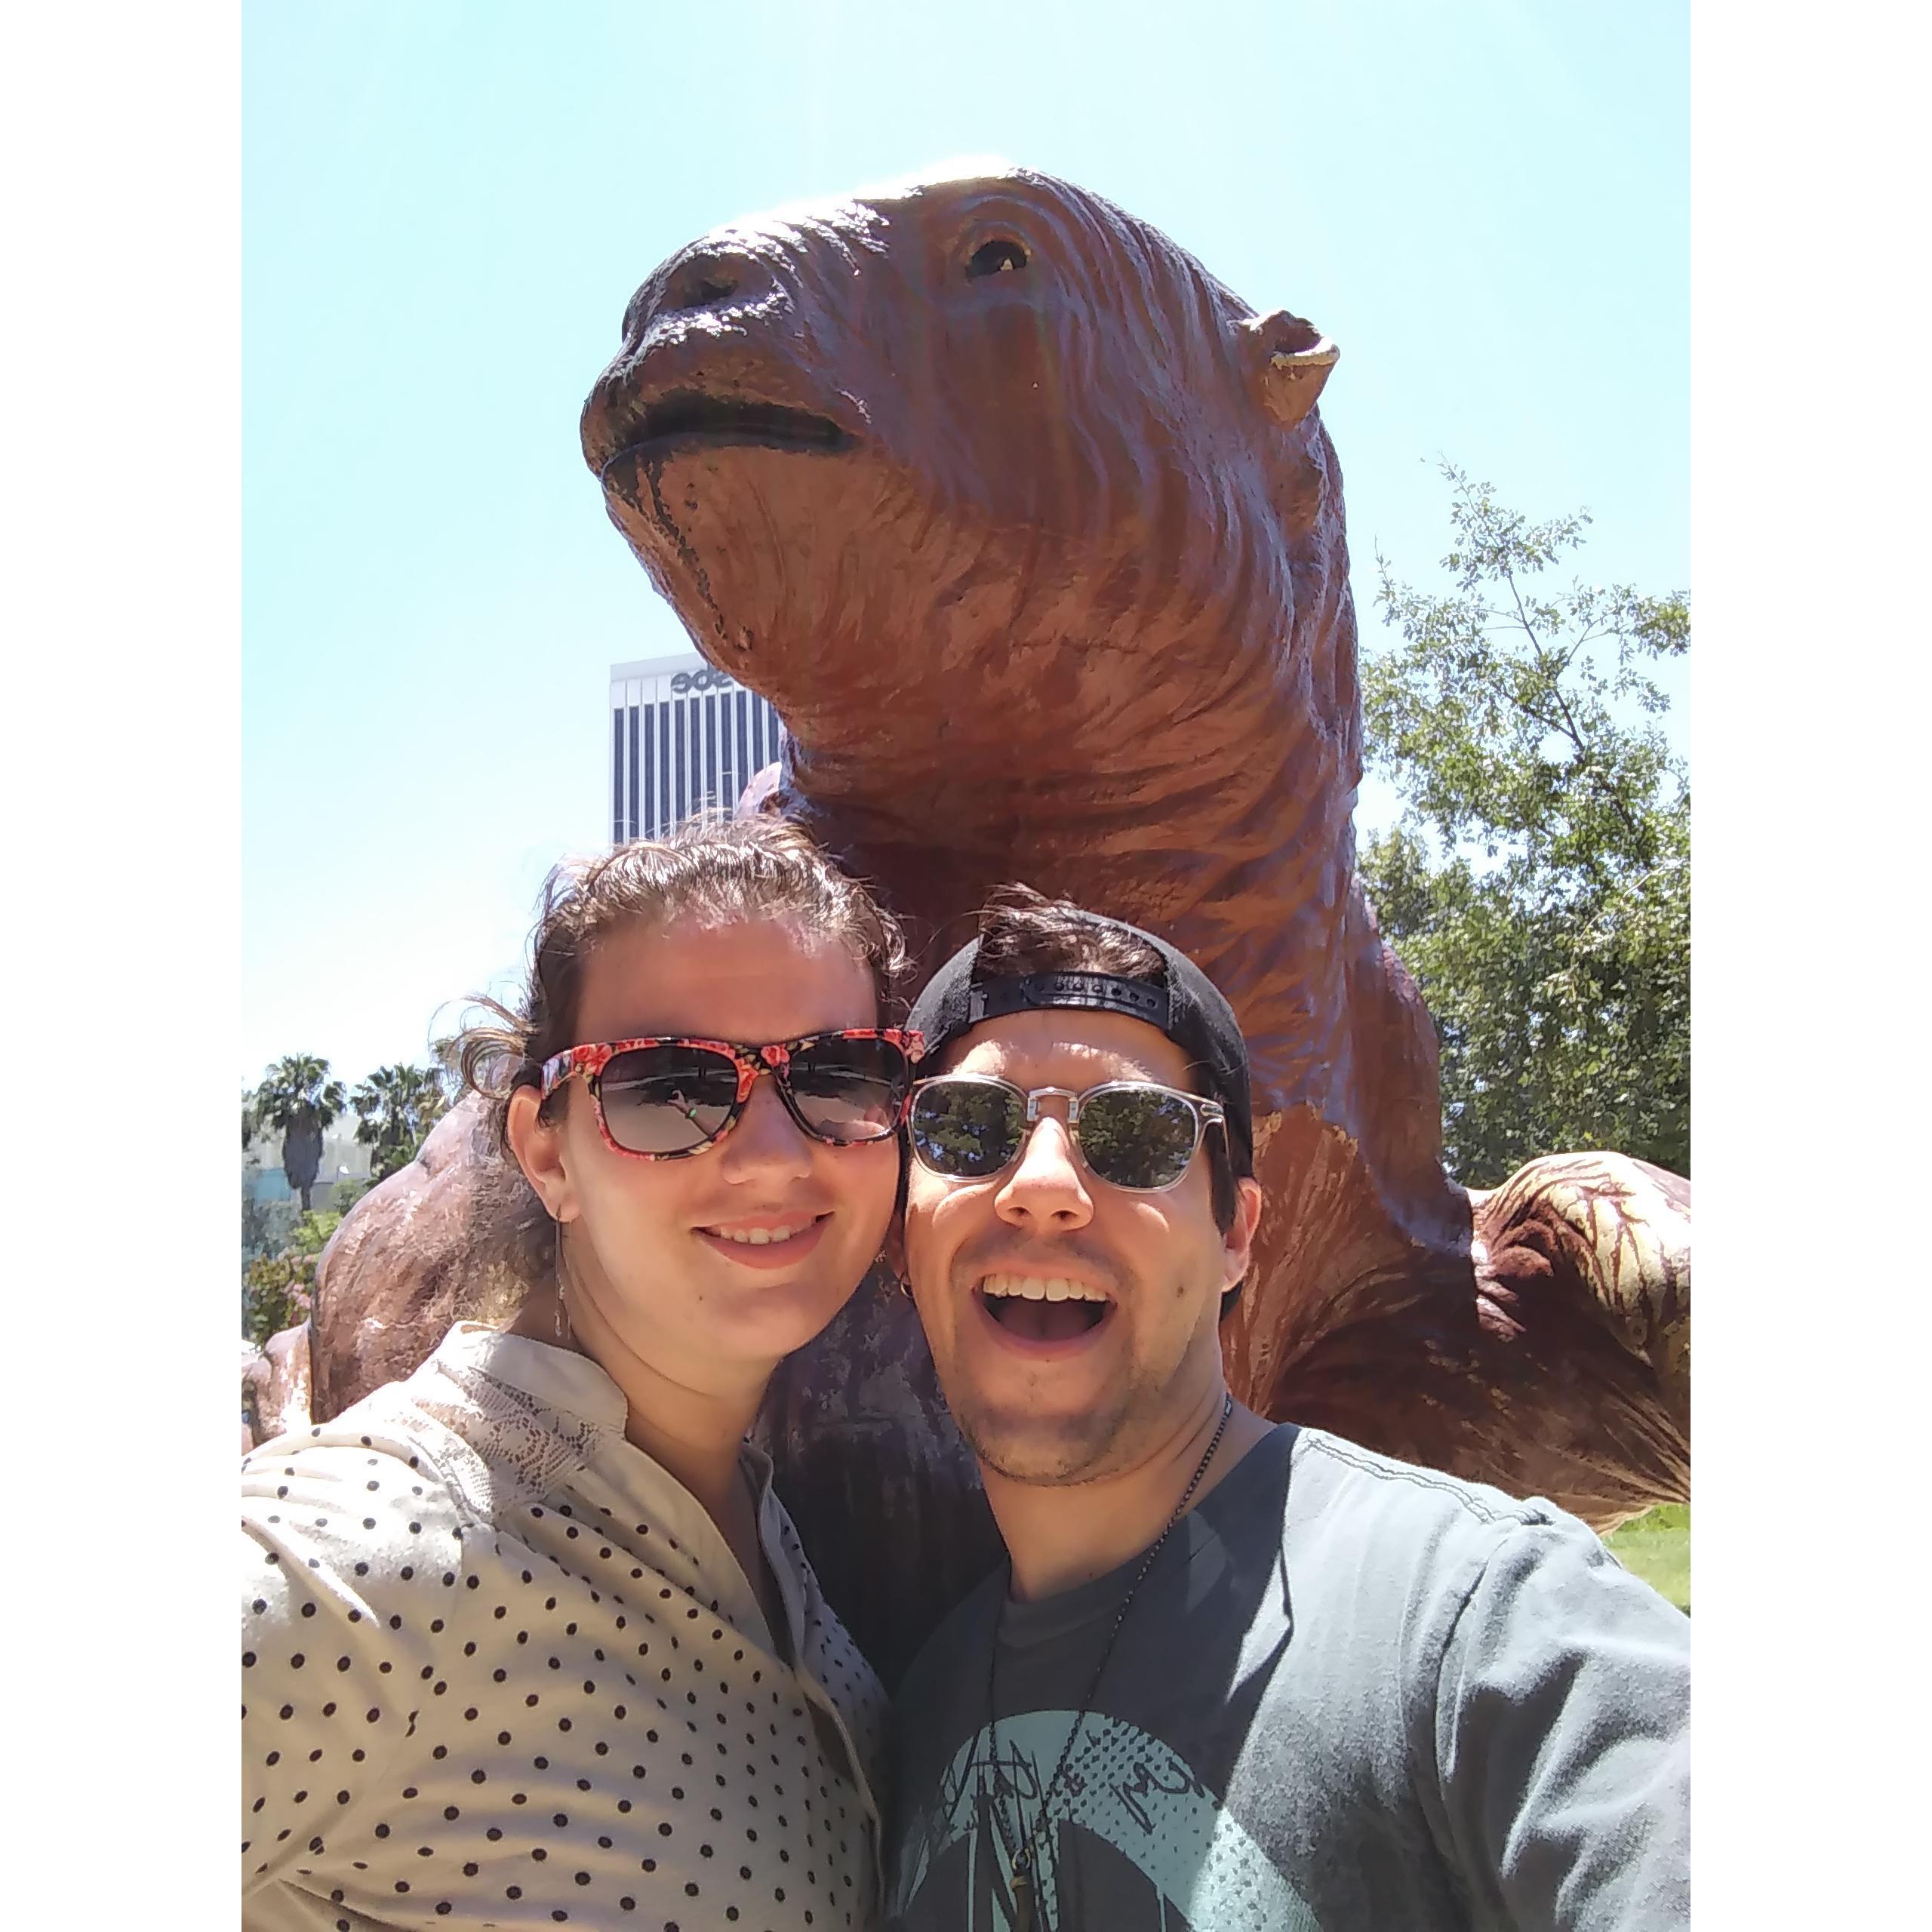 Mike was excited to meet the giant sloth at La Brea Tar Pits - Los Angeles CA - June 2017